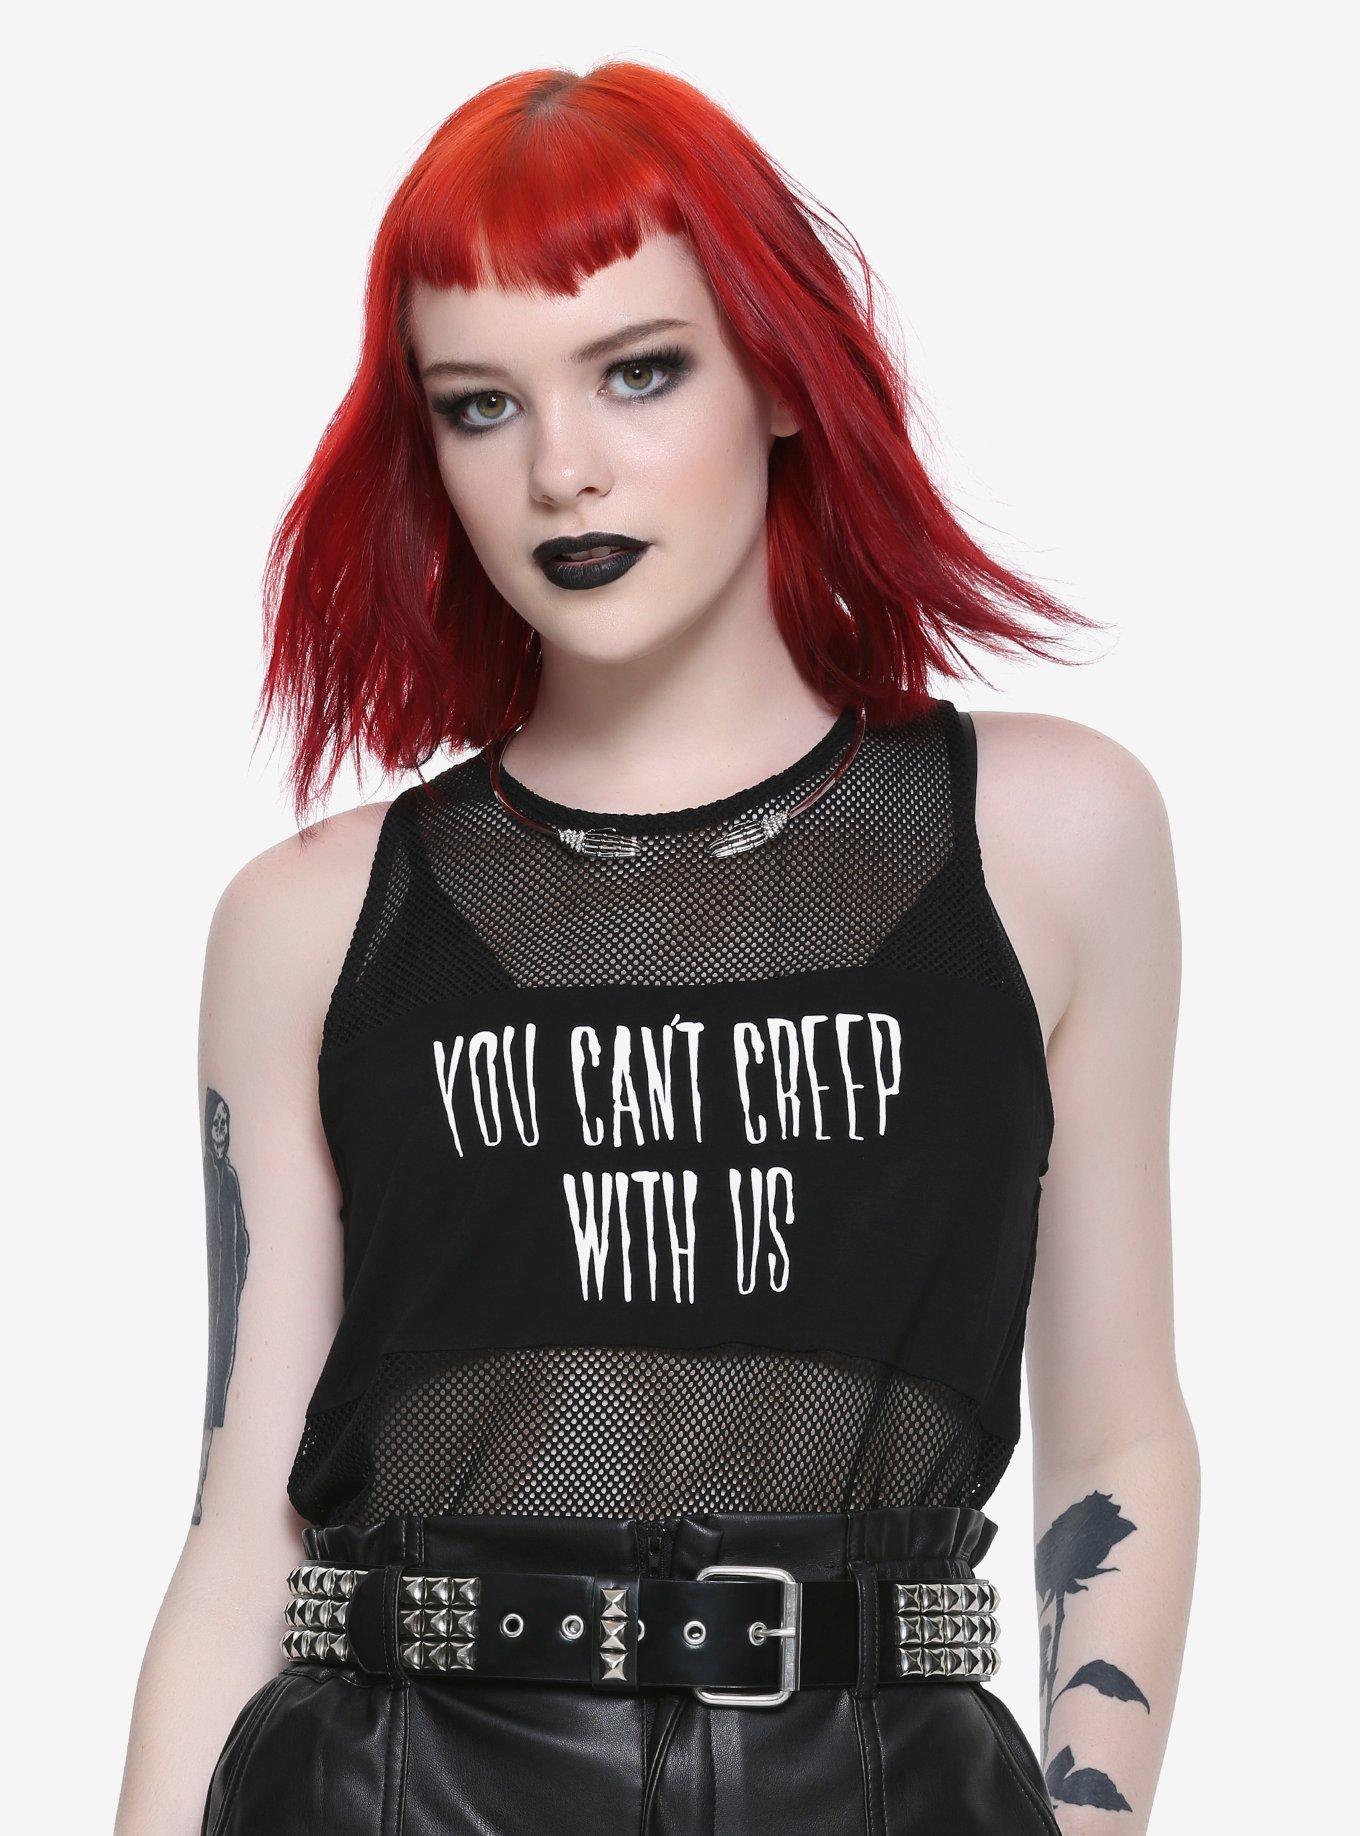 BlackCraft Creep With Us Inset Girls Fishnet Tank Top Hot Topic ...